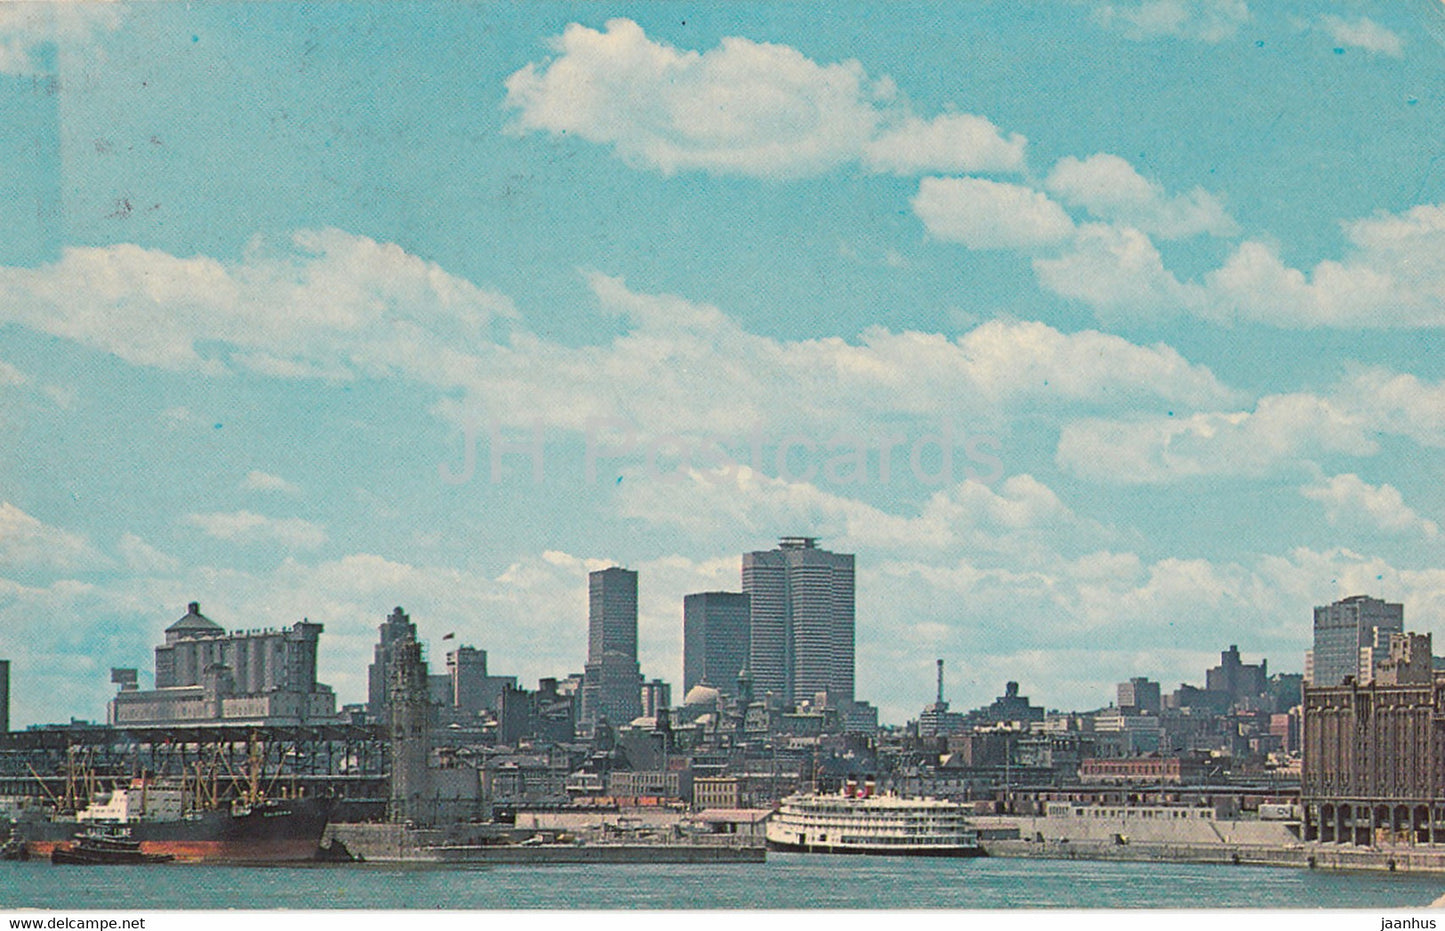 Montreal - View of the Harbour and Skyline as seen from St Heleś Island - ship - 1965 - Canada - used - JH Postcards